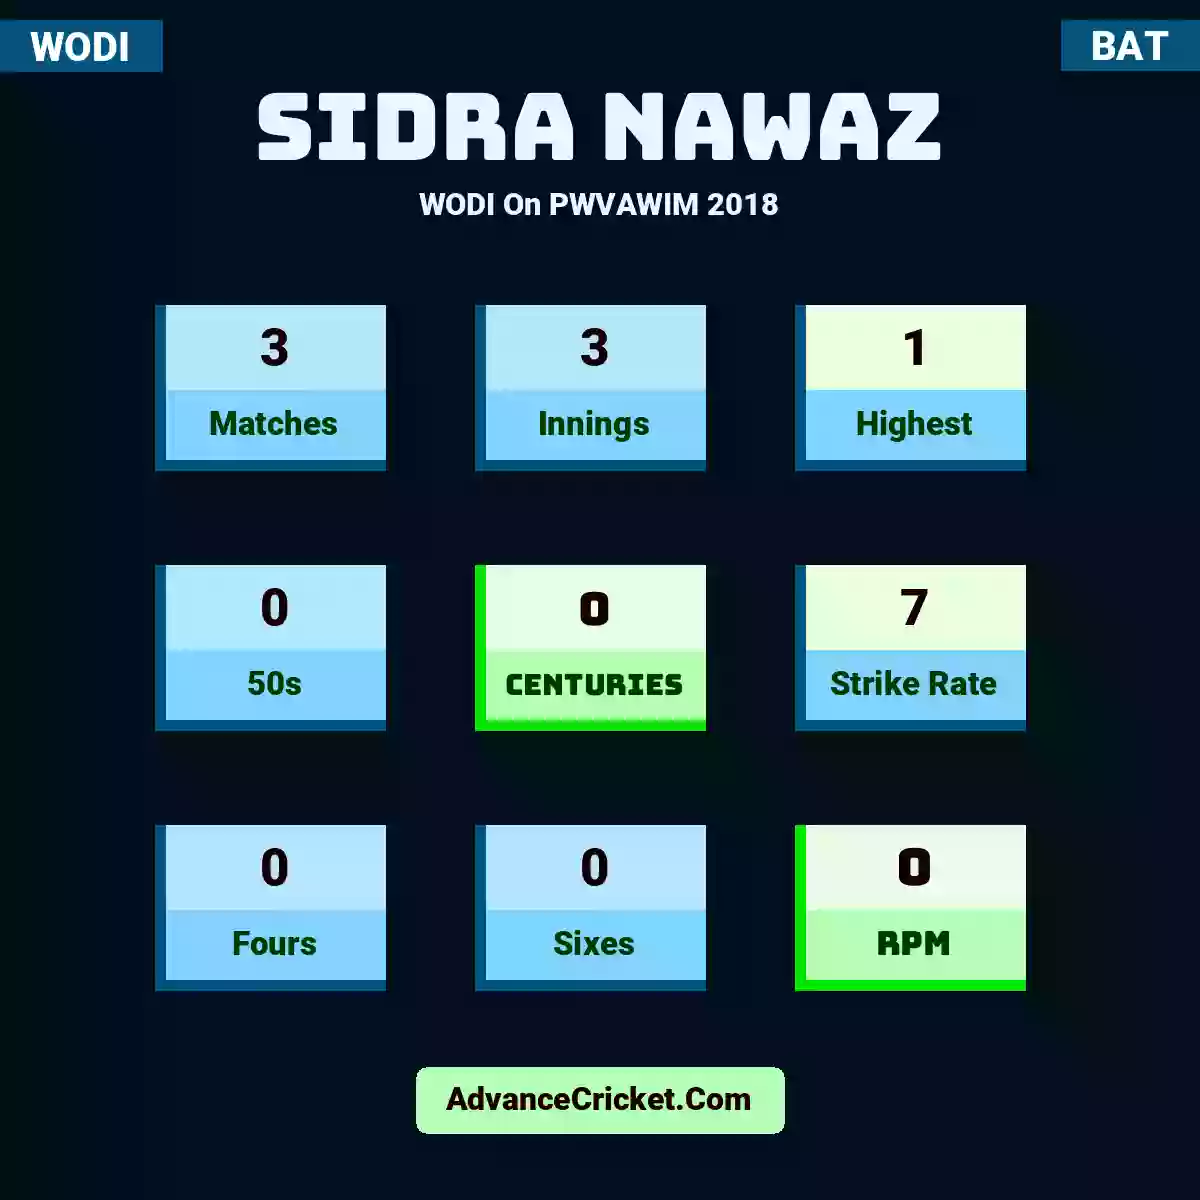 Sidra Nawaz WODI  On PWVAWIM 2018, Sidra Nawaz played 3 matches, scored 1 runs as highest, 0 half-centuries, and 0 centuries, with a strike rate of 7. S.Nawaz hit 0 fours and 0 sixes, with an RPM of 0.